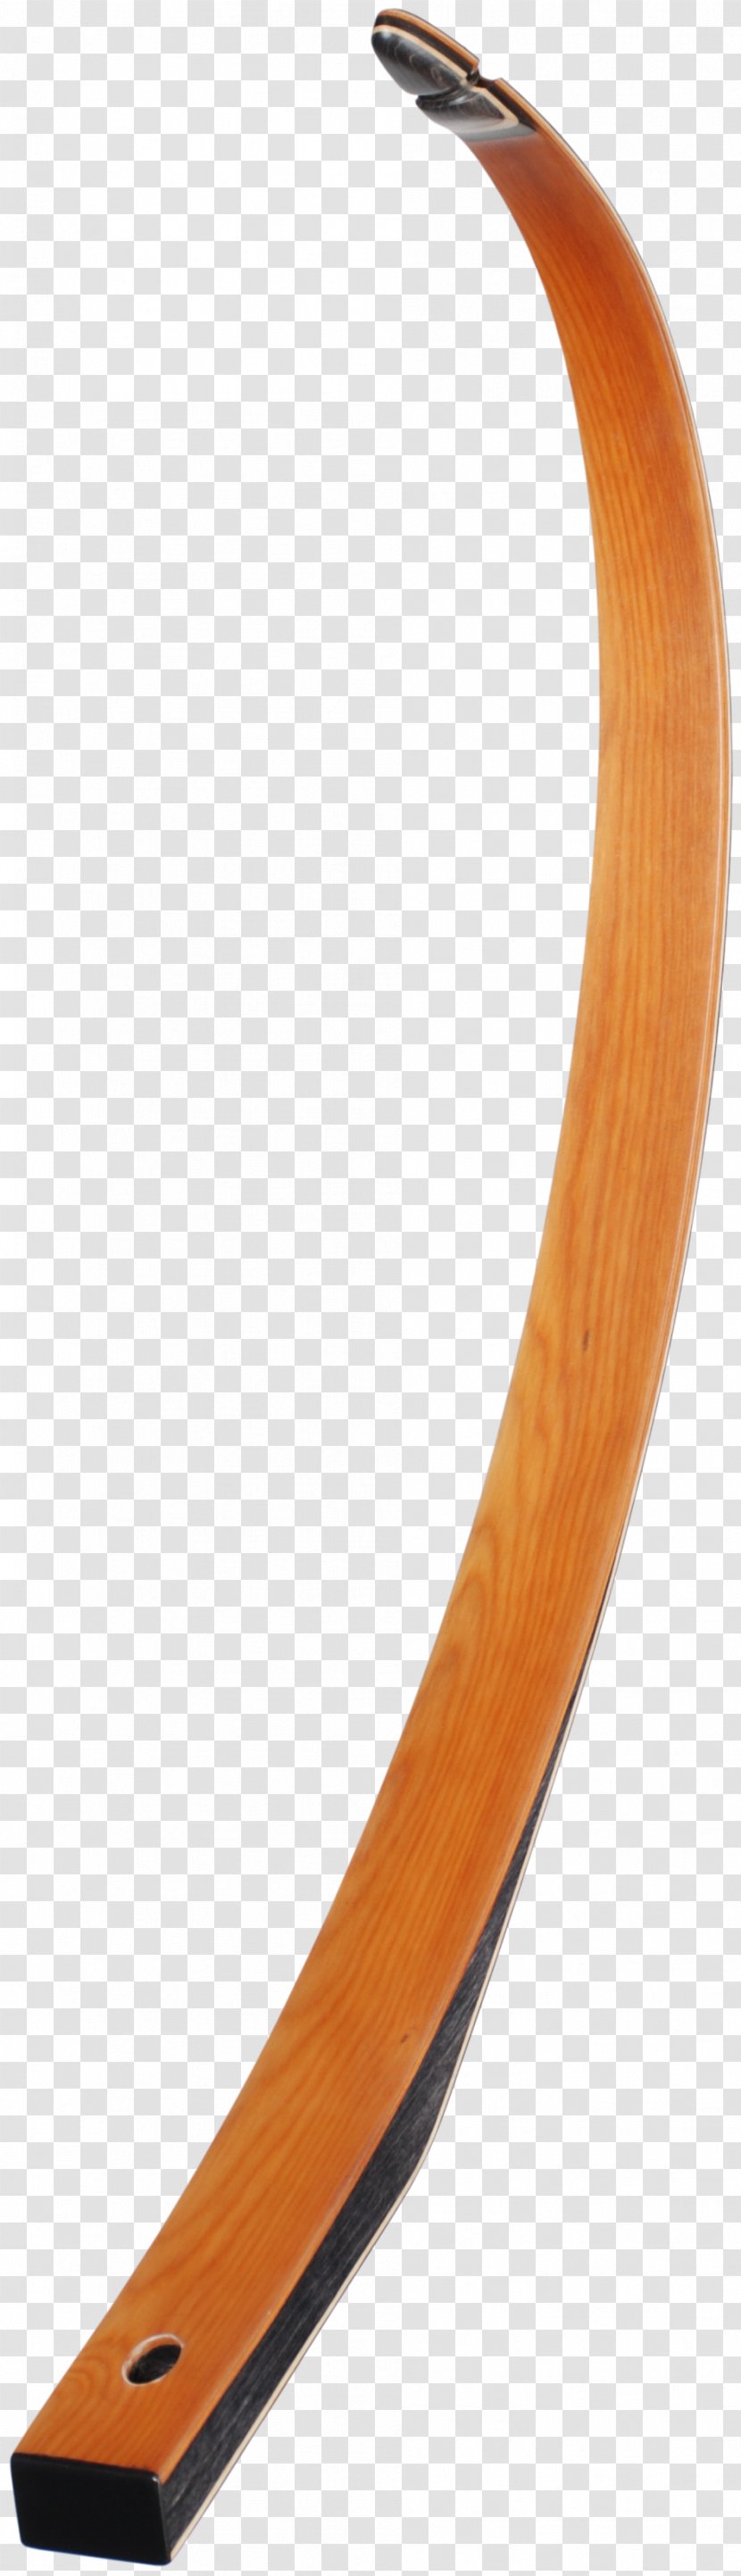 English Longbow Yew Wood Bow And Arrow - Tree Transparent PNG